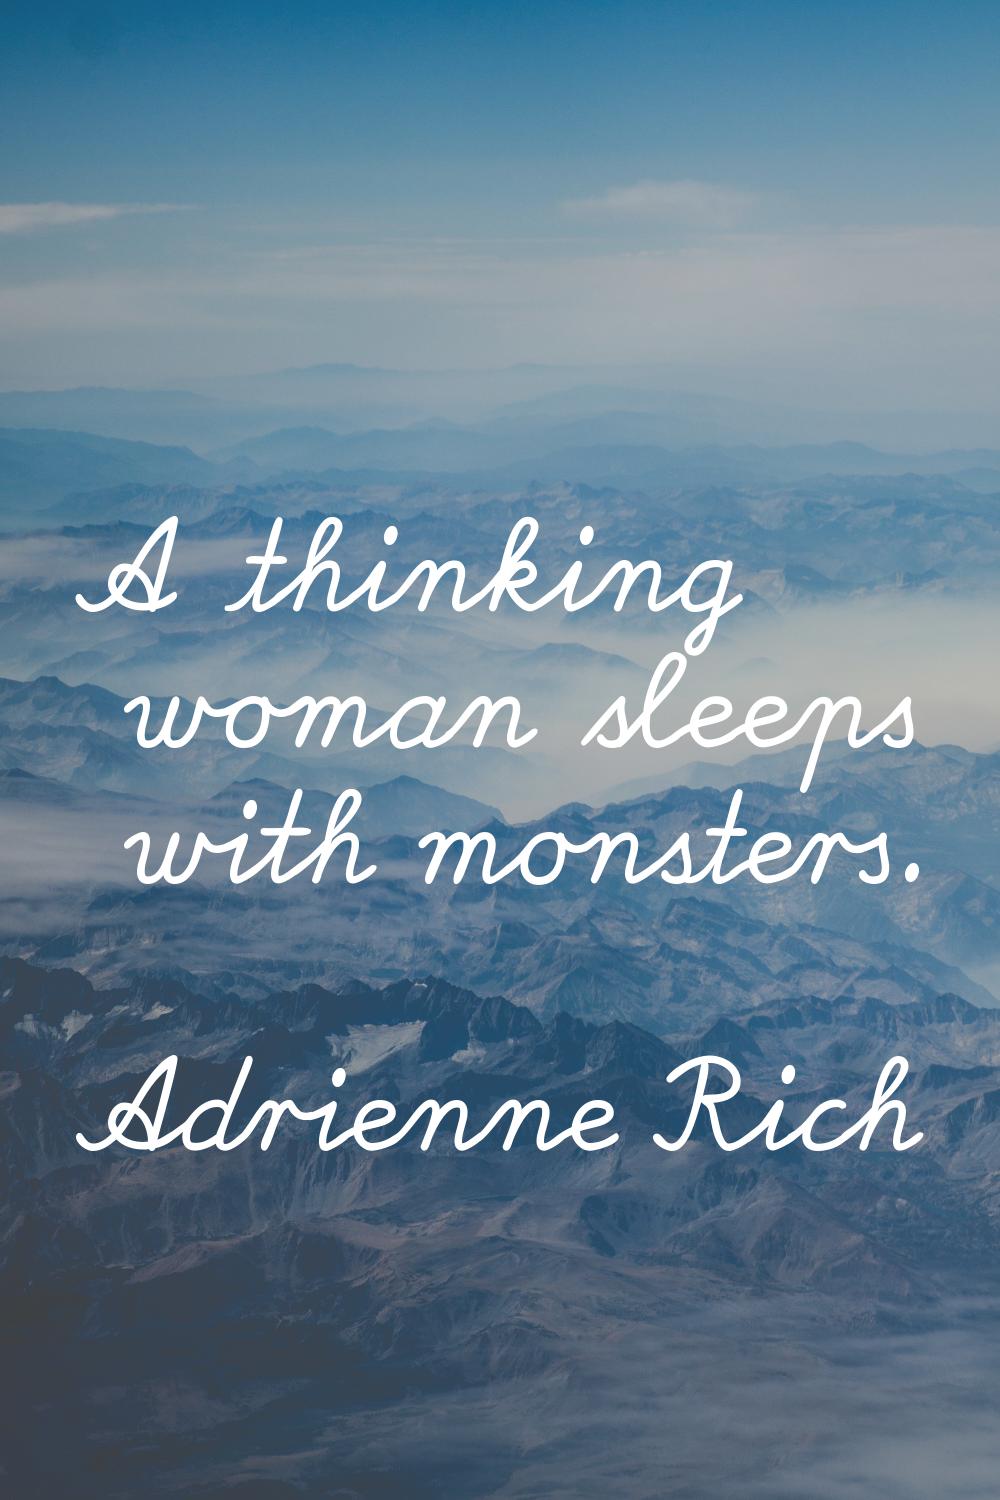 A thinking woman sleeps with monsters.